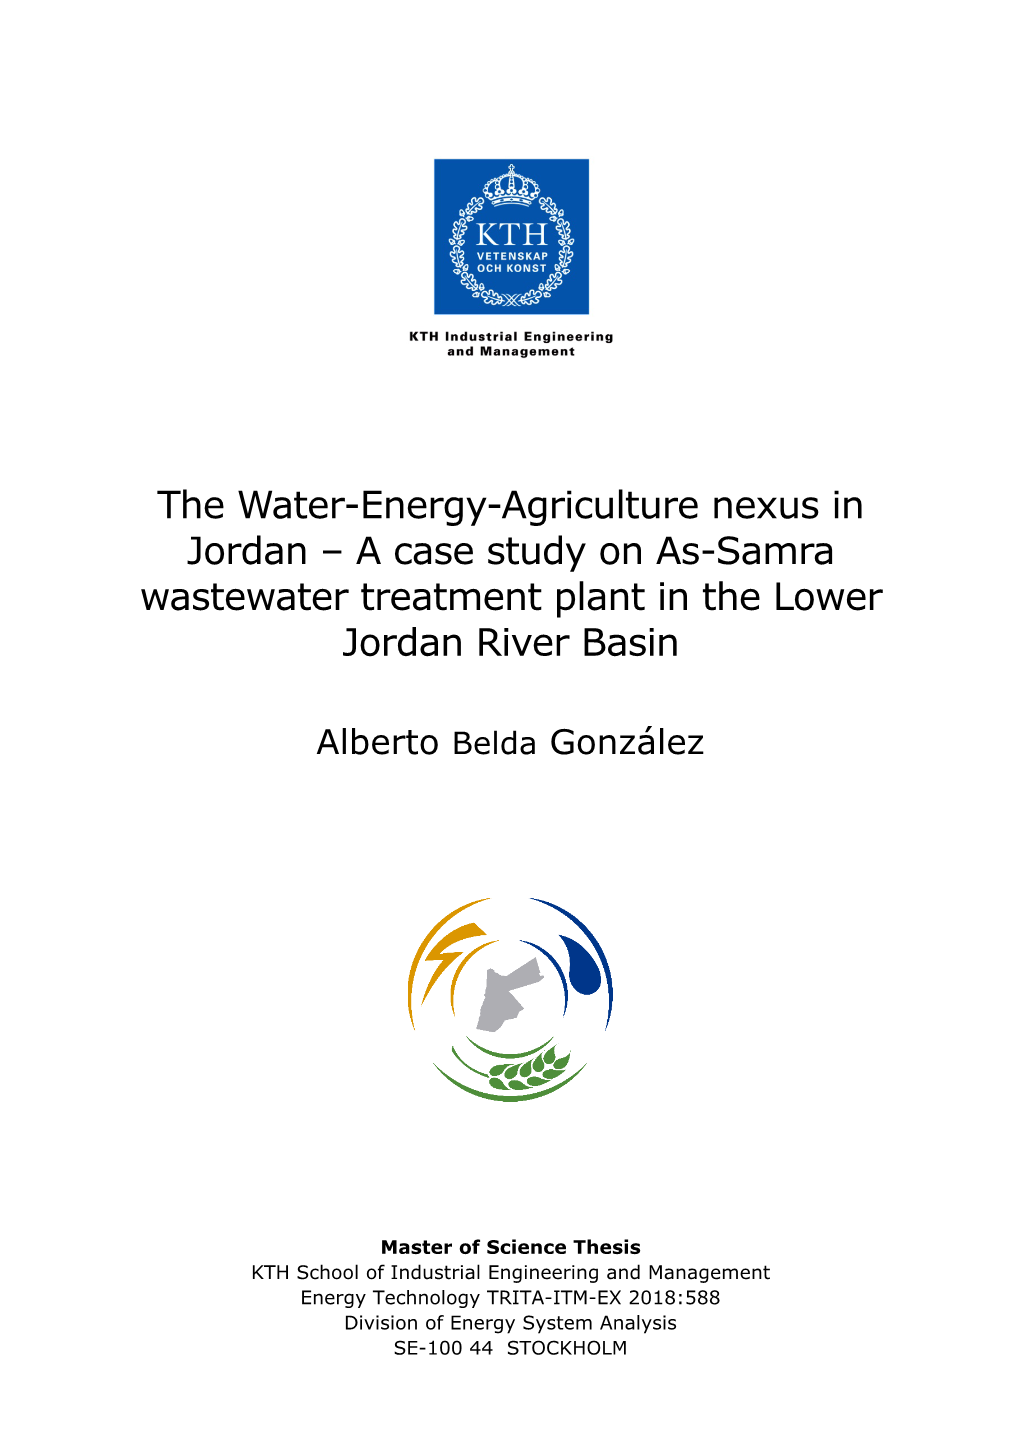 The Water-Energy-Agriculture Nexus in Jordan – a Case Study on As-Samra Wastewater Treatment Plant in the Lower Jordan River Basin